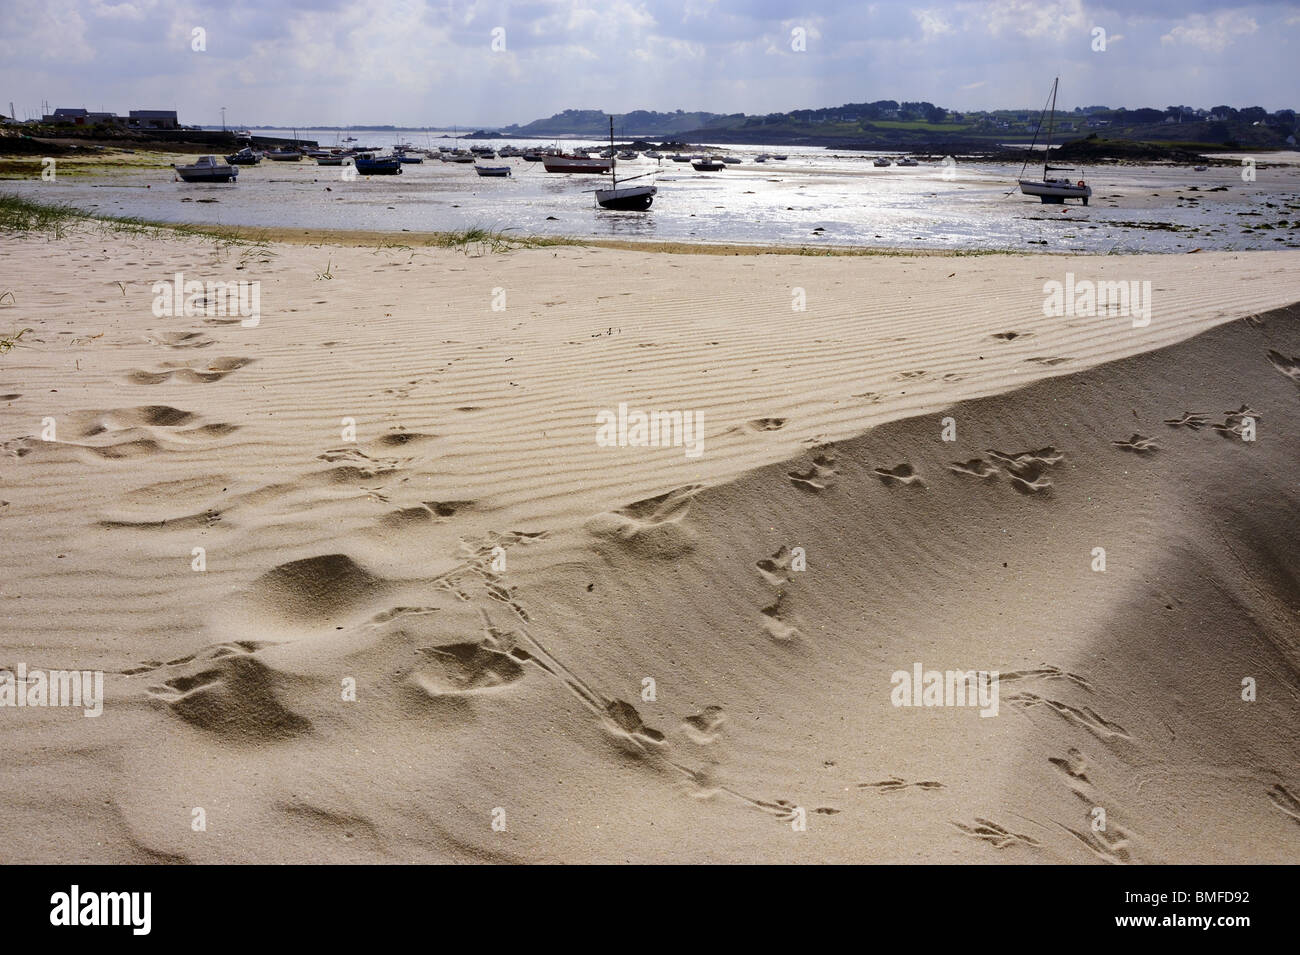 The beach and sand dunes, St Michel, Finistere, Brittany, France Stock Photo